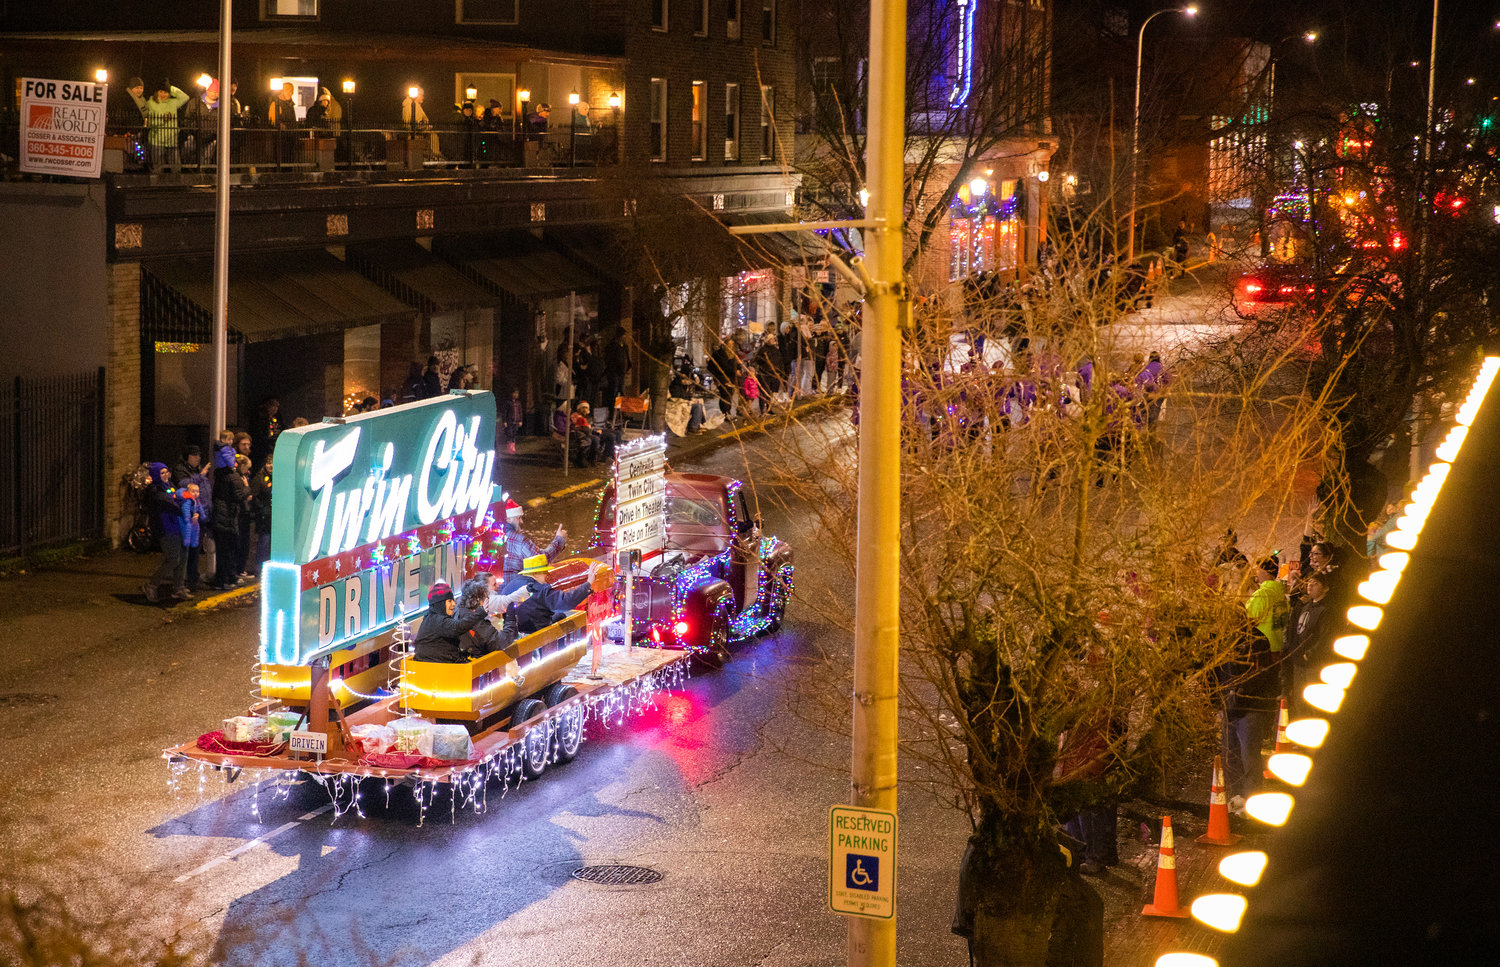 The Twin City Drive-In Theater ride-on train rolls through downtown Centralia on a float during the Lighted Tractor Parade.